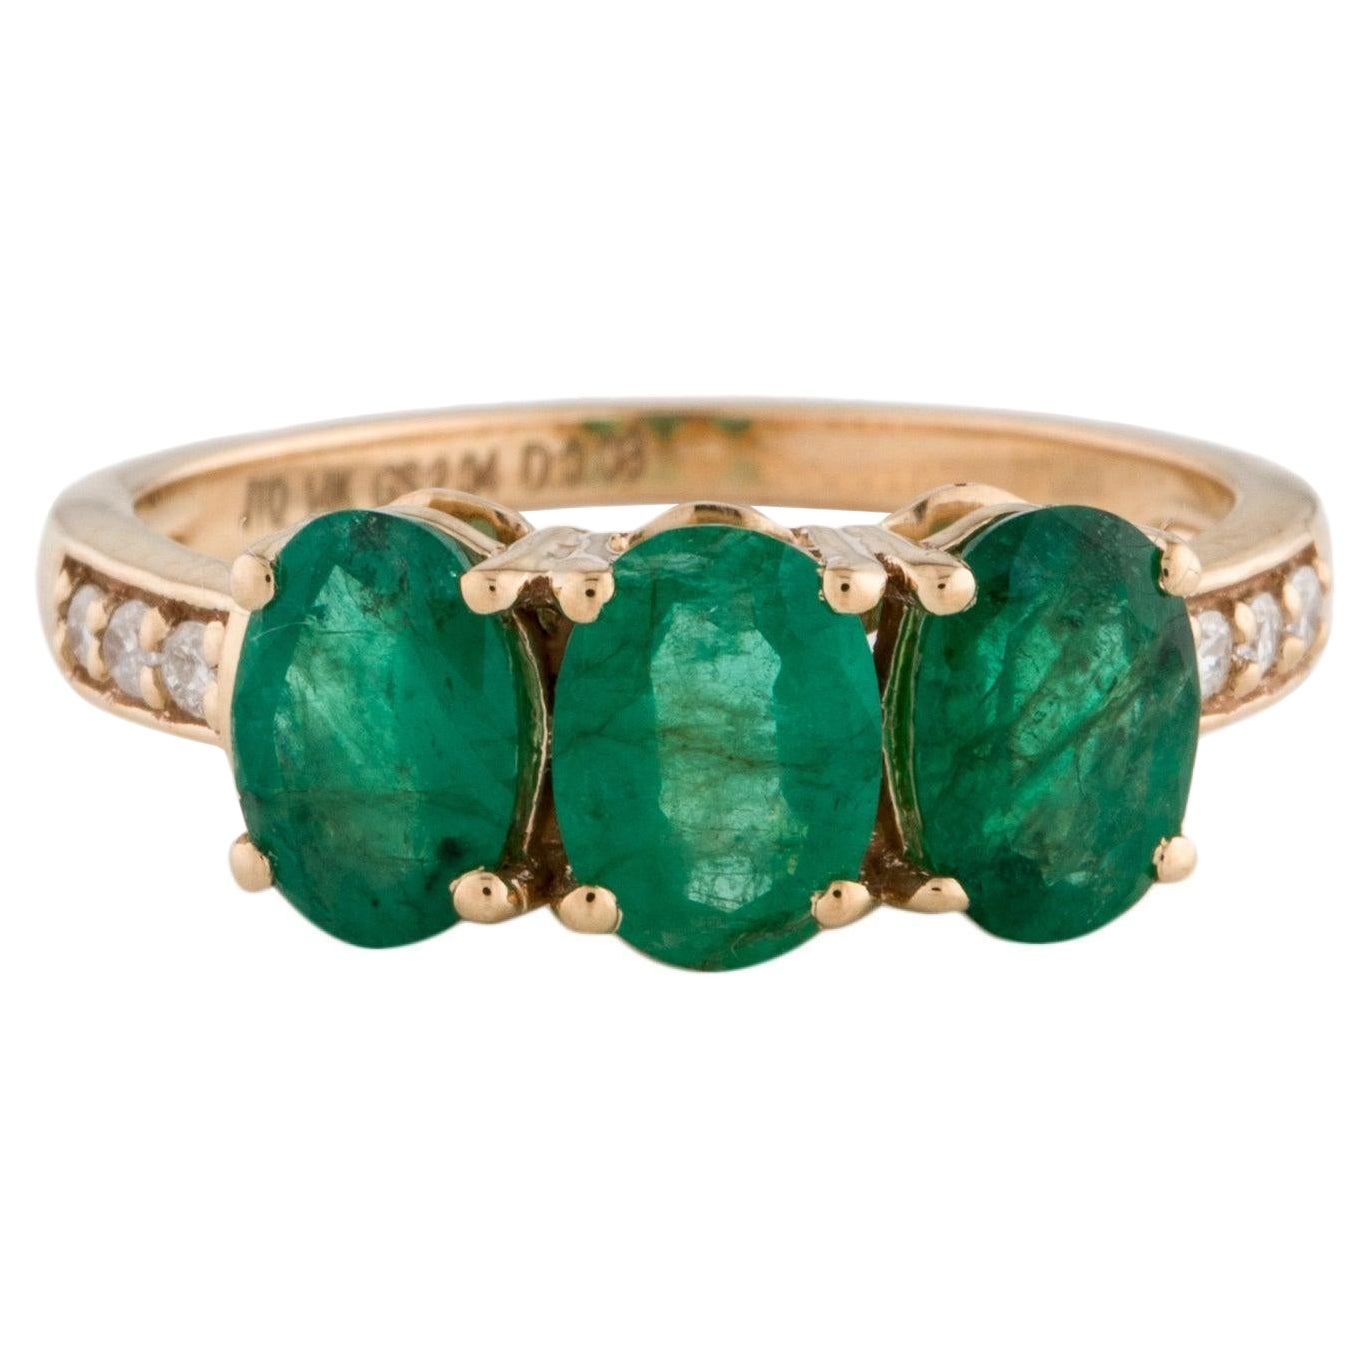 Stunning 14K Emerald & Diamond Band Ring 2.10ctw - Size 6.75 - Timeless Luxury For Sale